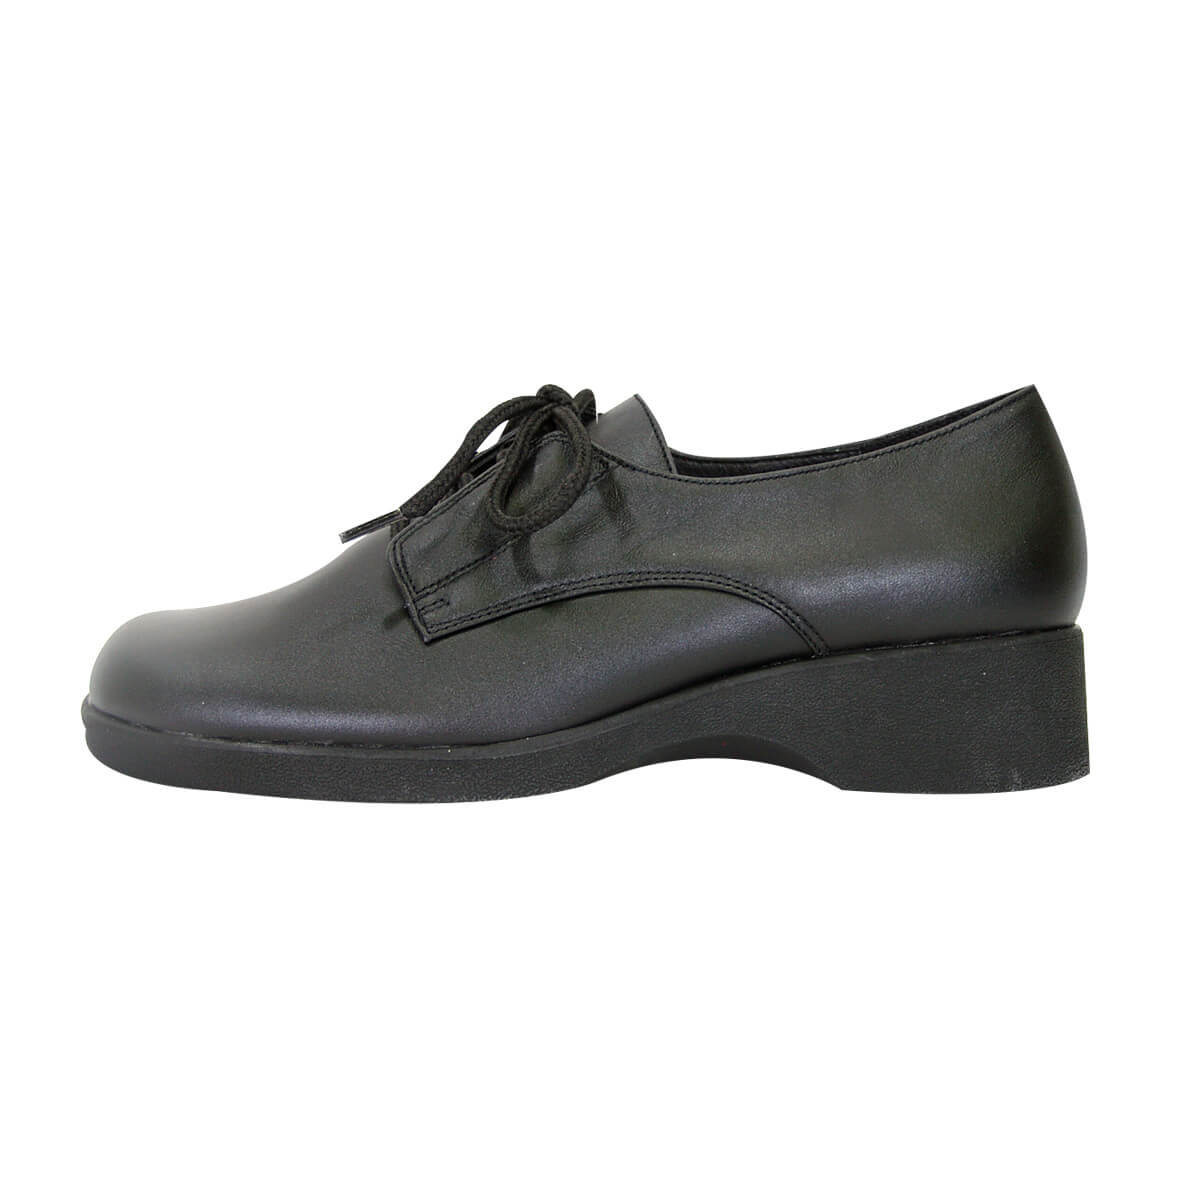 24 HOUR COMFORT Piper Women's Wide Width Leather Lace-Up Shoes